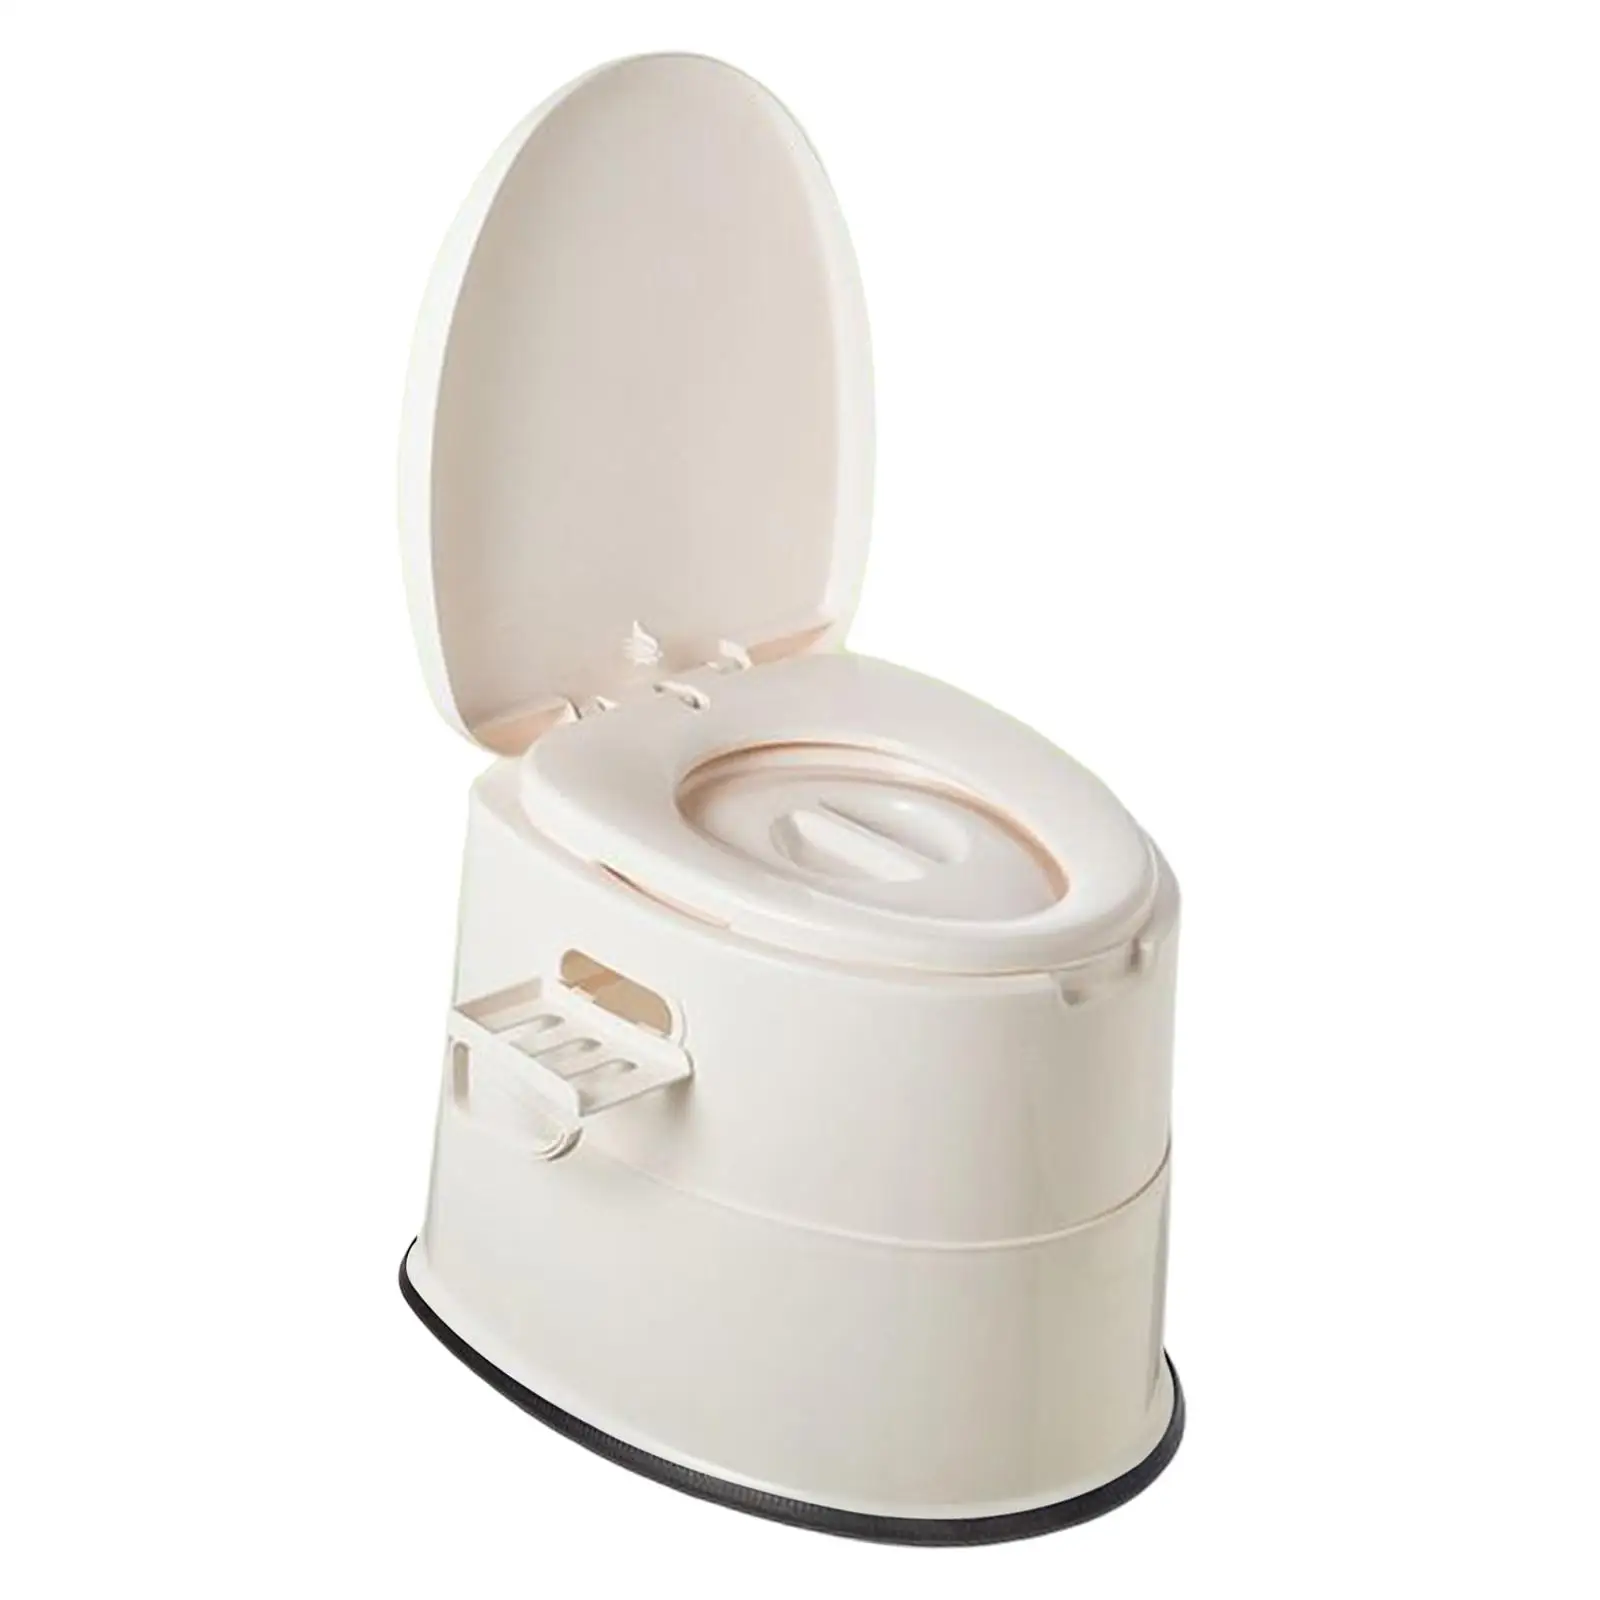 Portable Toilet Mobile Potty with Lid Outdoor Potty for Hiking Indoor